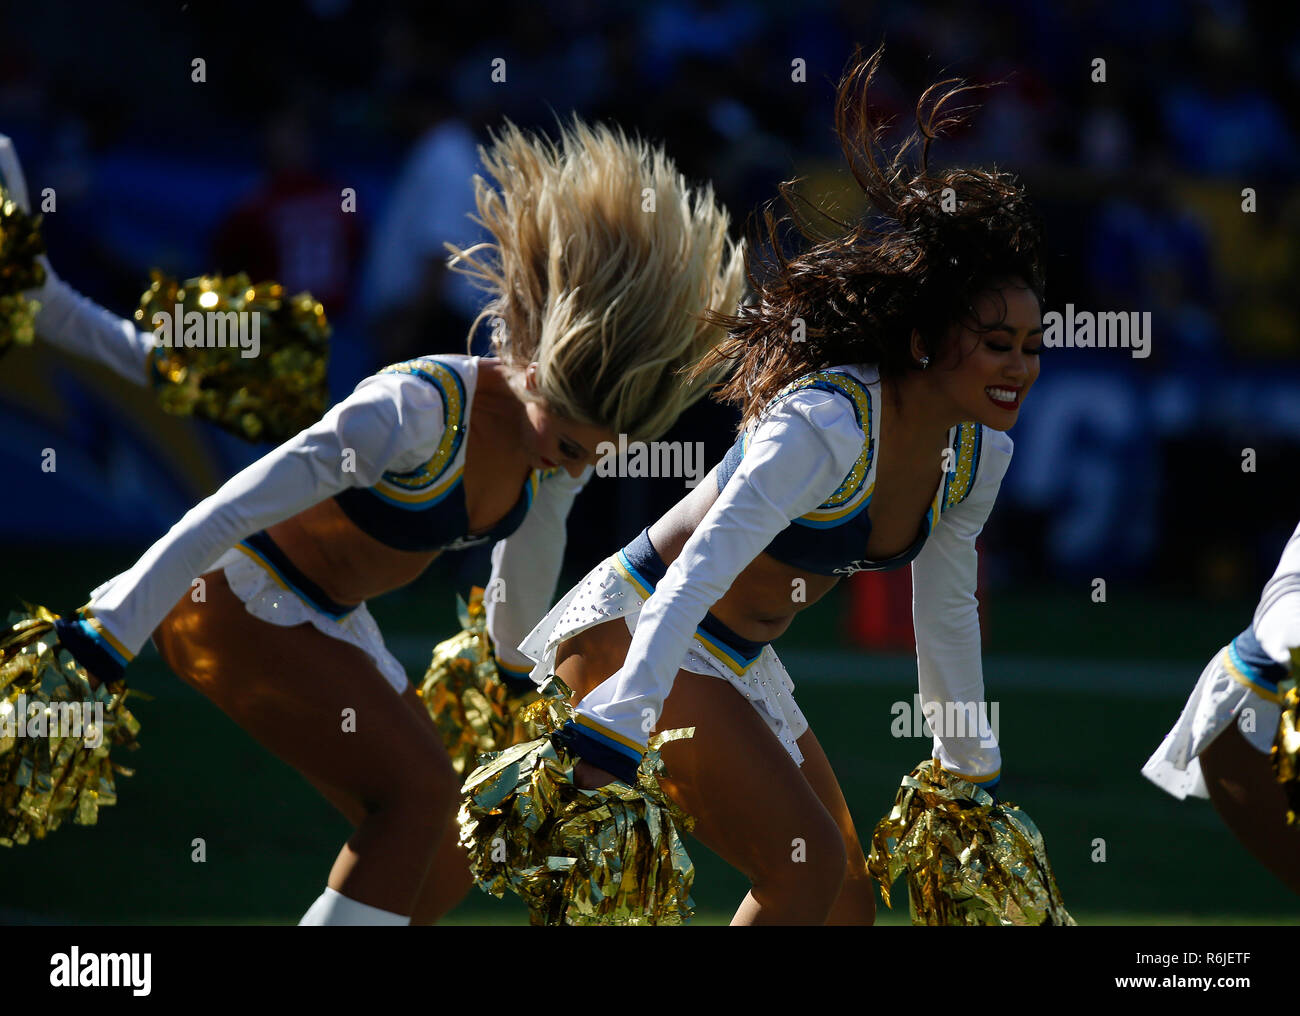 September 30, 2018 Los Angeles Chargers cheerleaders during the football game between the San Francisco 49ers and the Los Angeles Chargers at the StubHub Center in Carson, California. Charles Baus/CSM Stock Photo